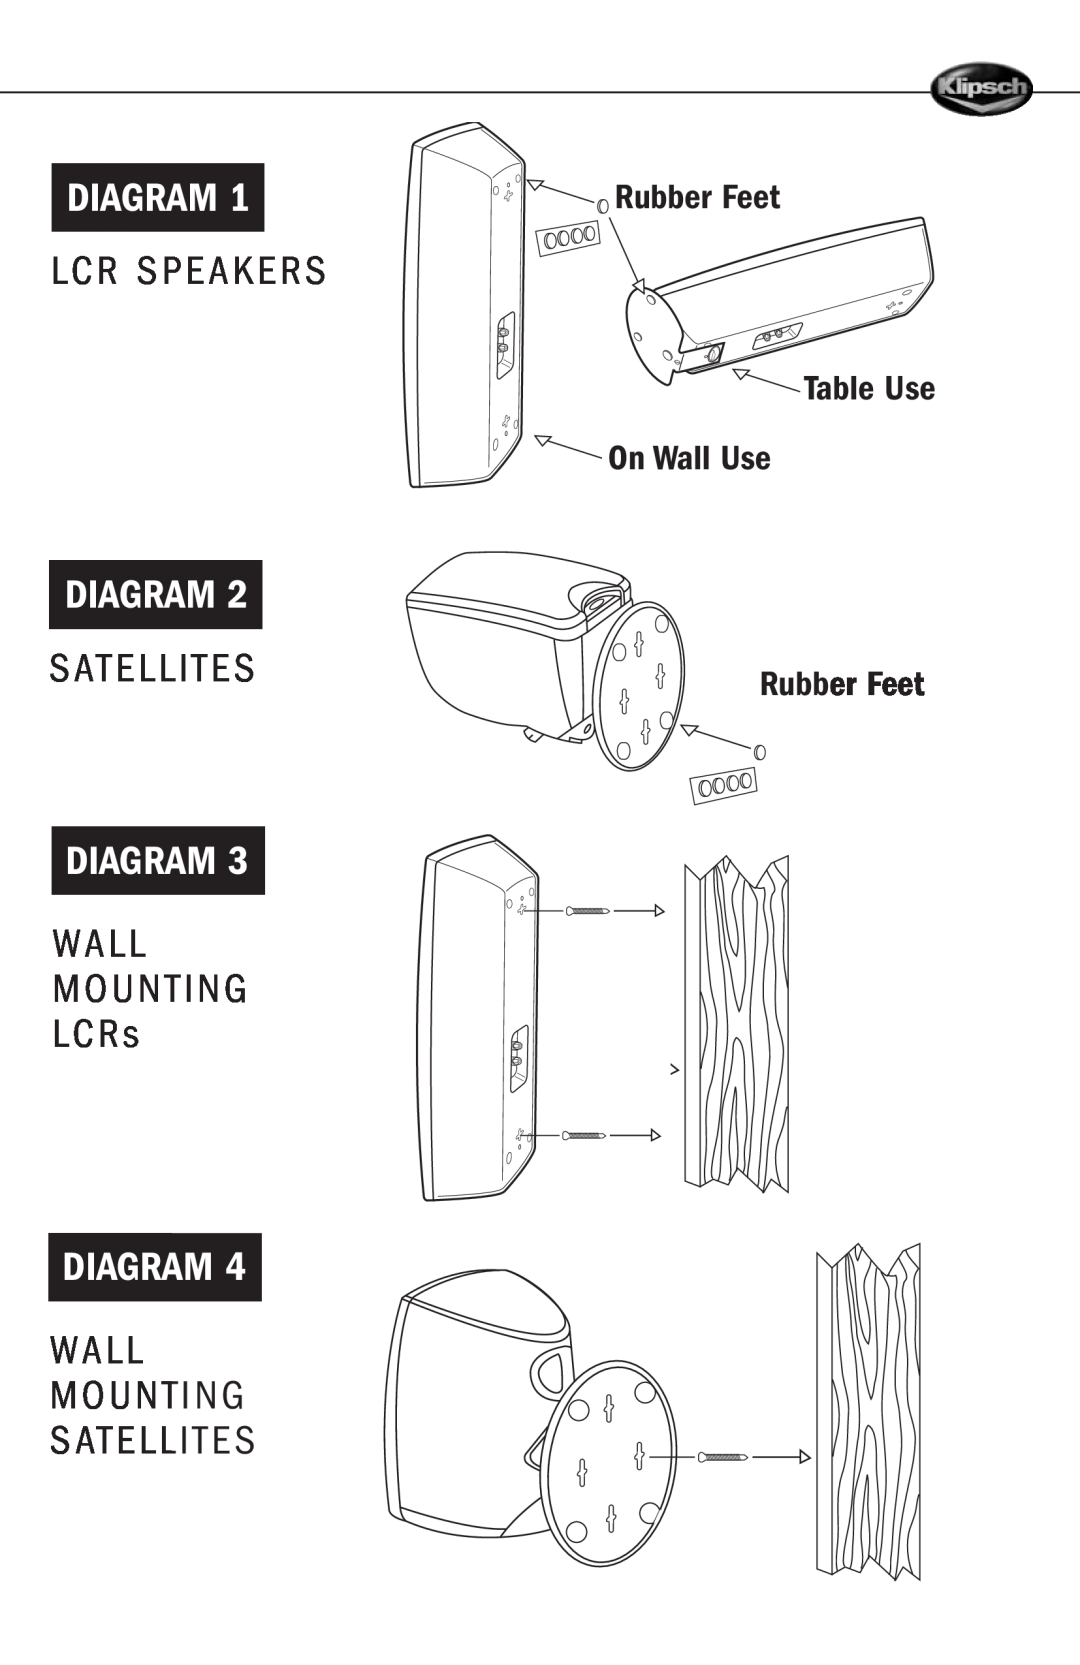 Klipsch Quintet SL Diagram, Lcr Speakers, Wall Mounting Satellites, Rubber Feet Table Use On Wall Use Rubber Feet 